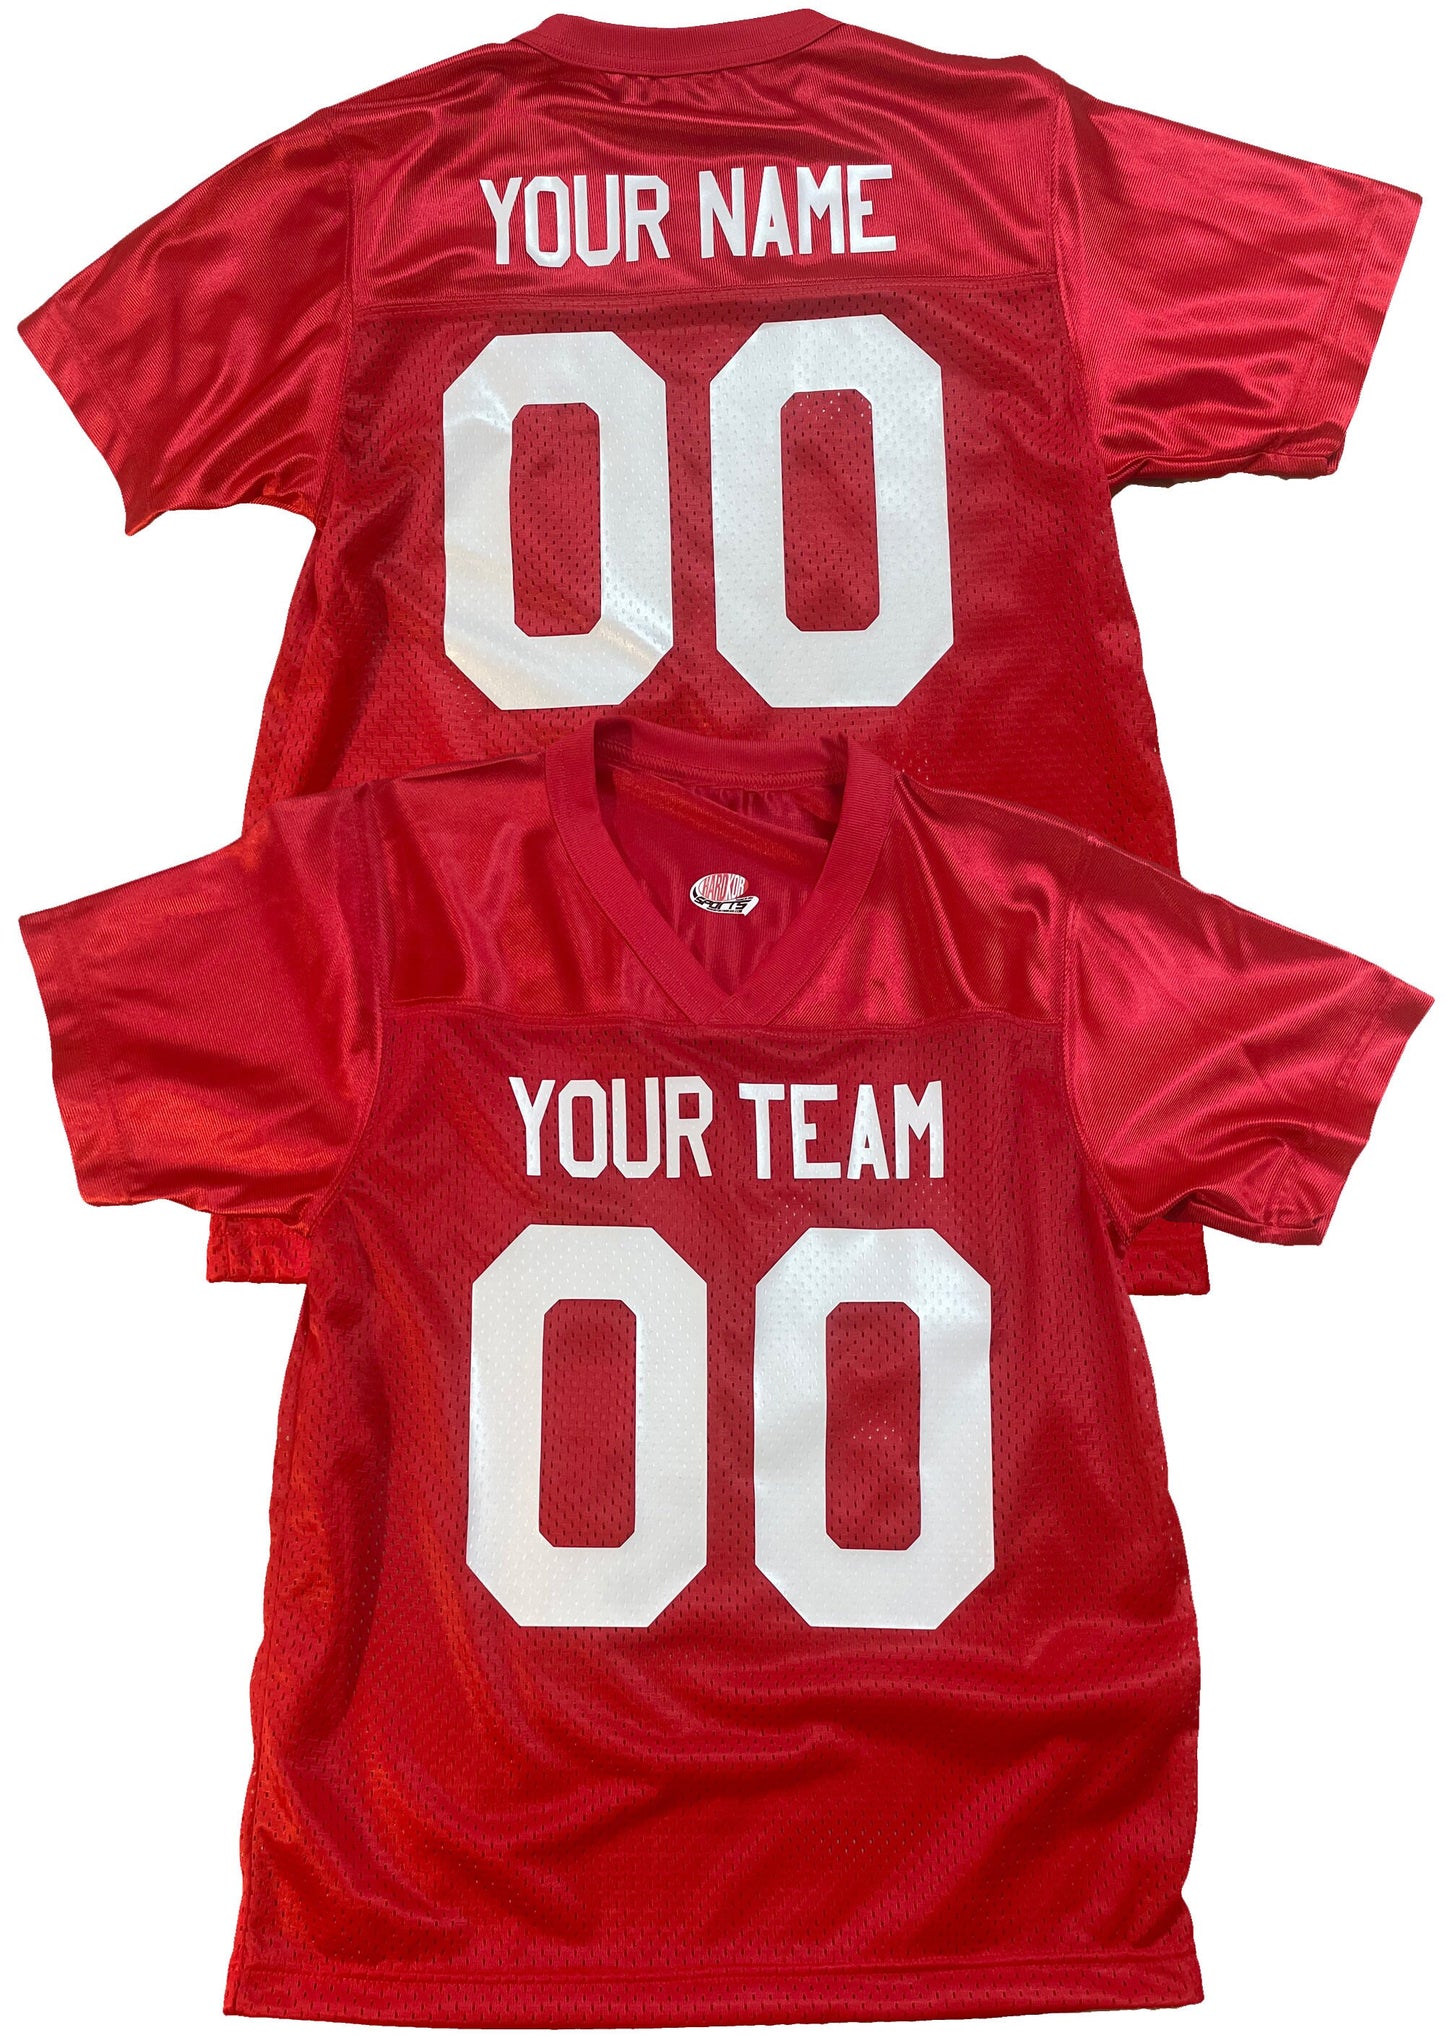 Custom Football Jersey Throwback Replica Fan Shirt | Black, Scarlet Red, White, Royal Blue, or Navy Blue with Your Names and Numbers